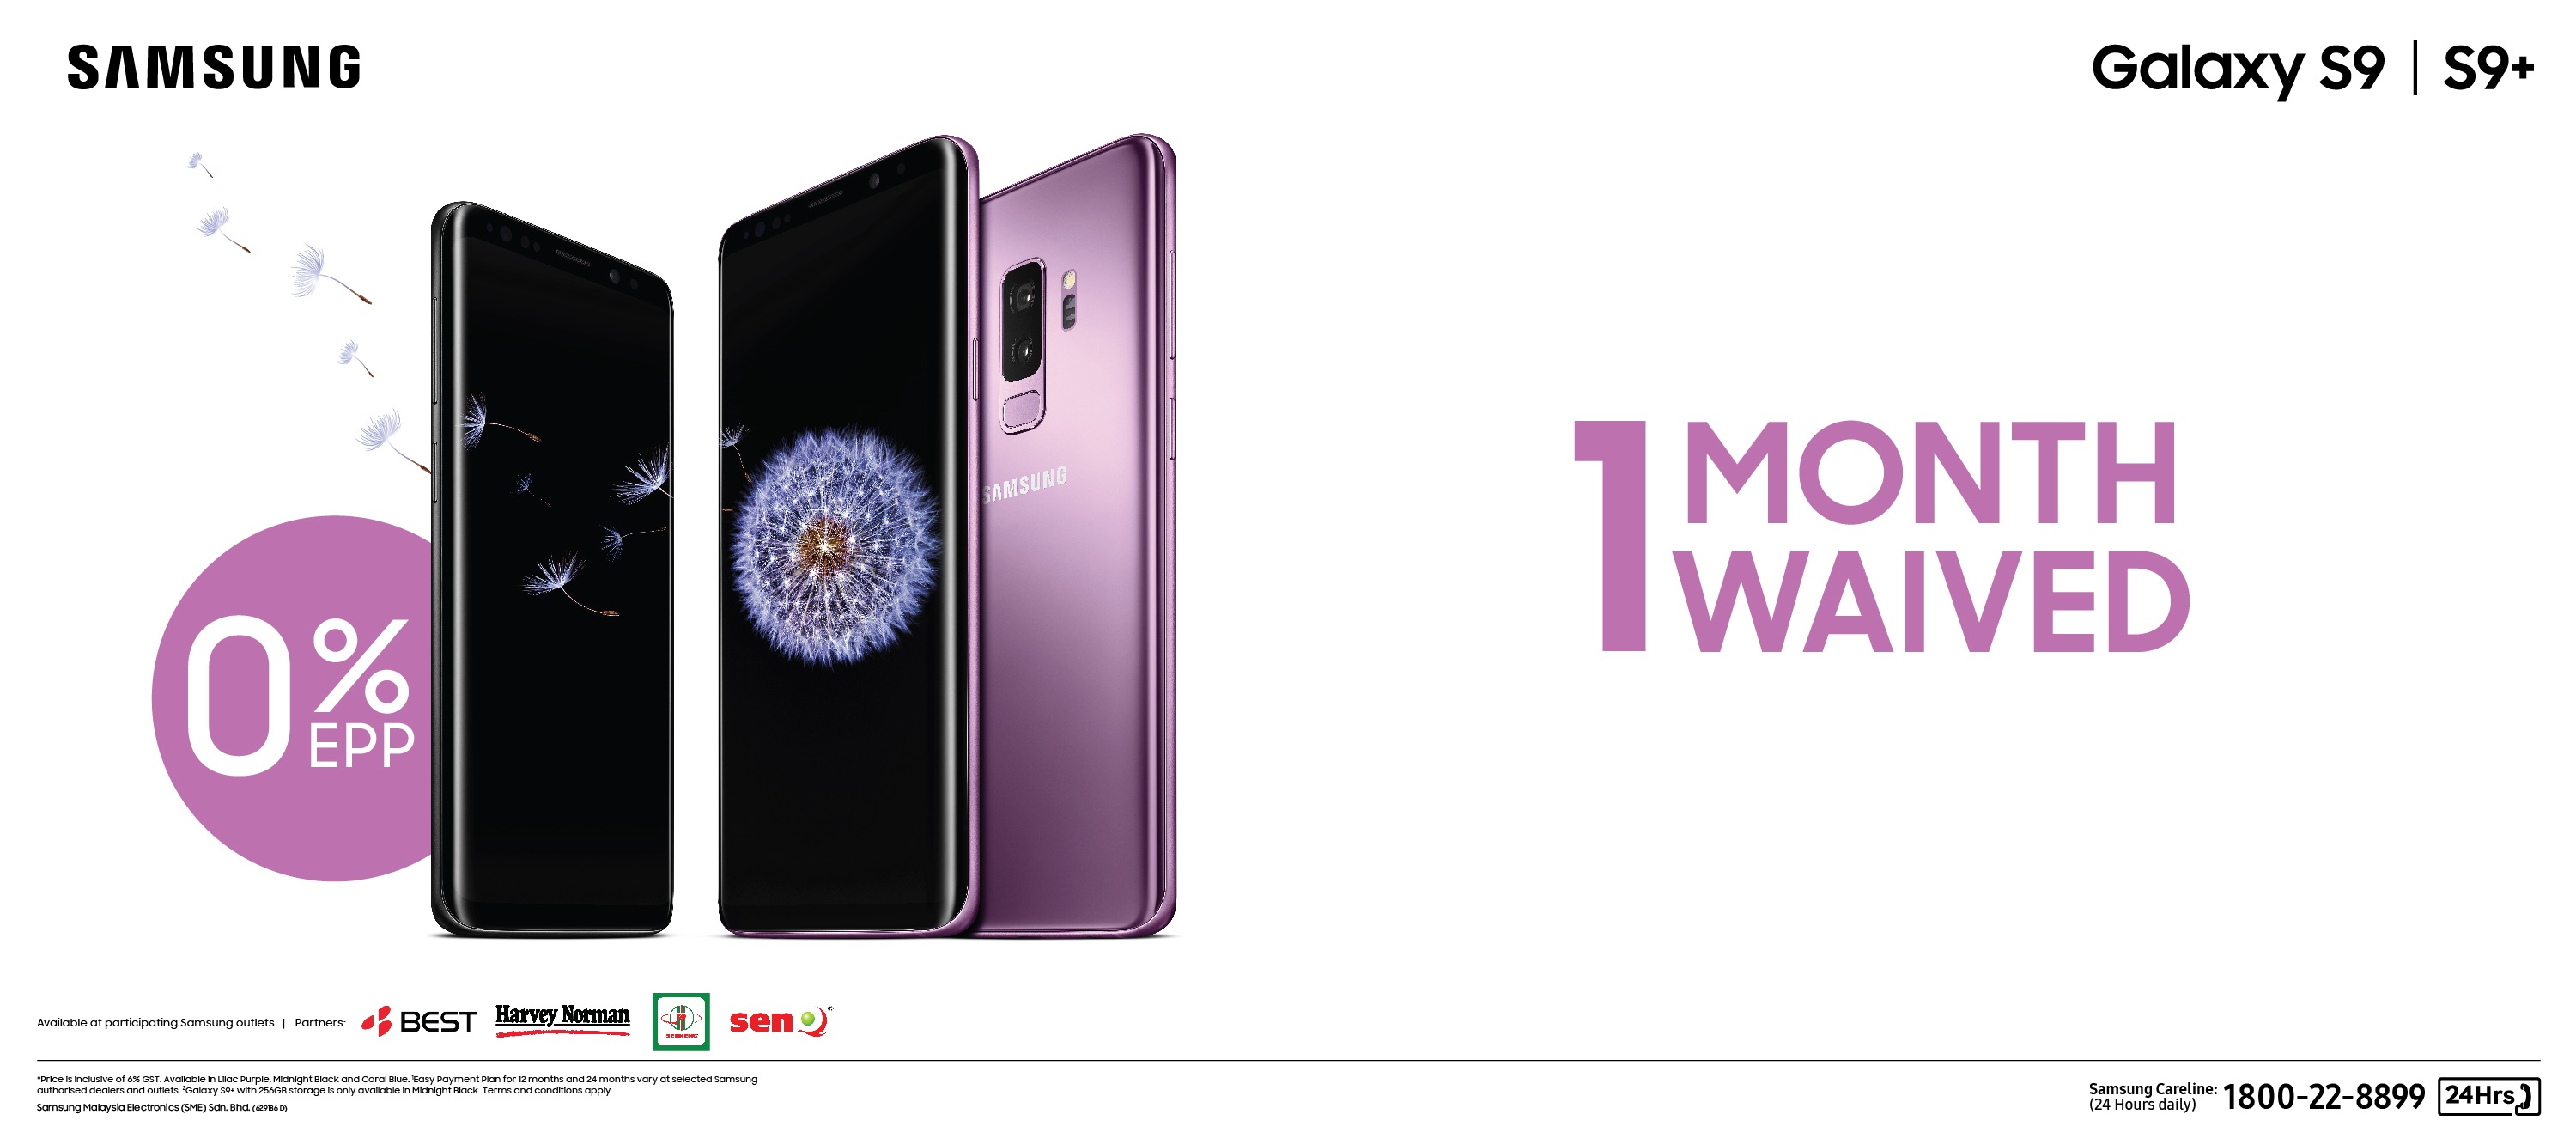 Samsung Galaxy S9 & S9+ now gets a 1 month waive of instalment plan with 0% Easy Payment Plan